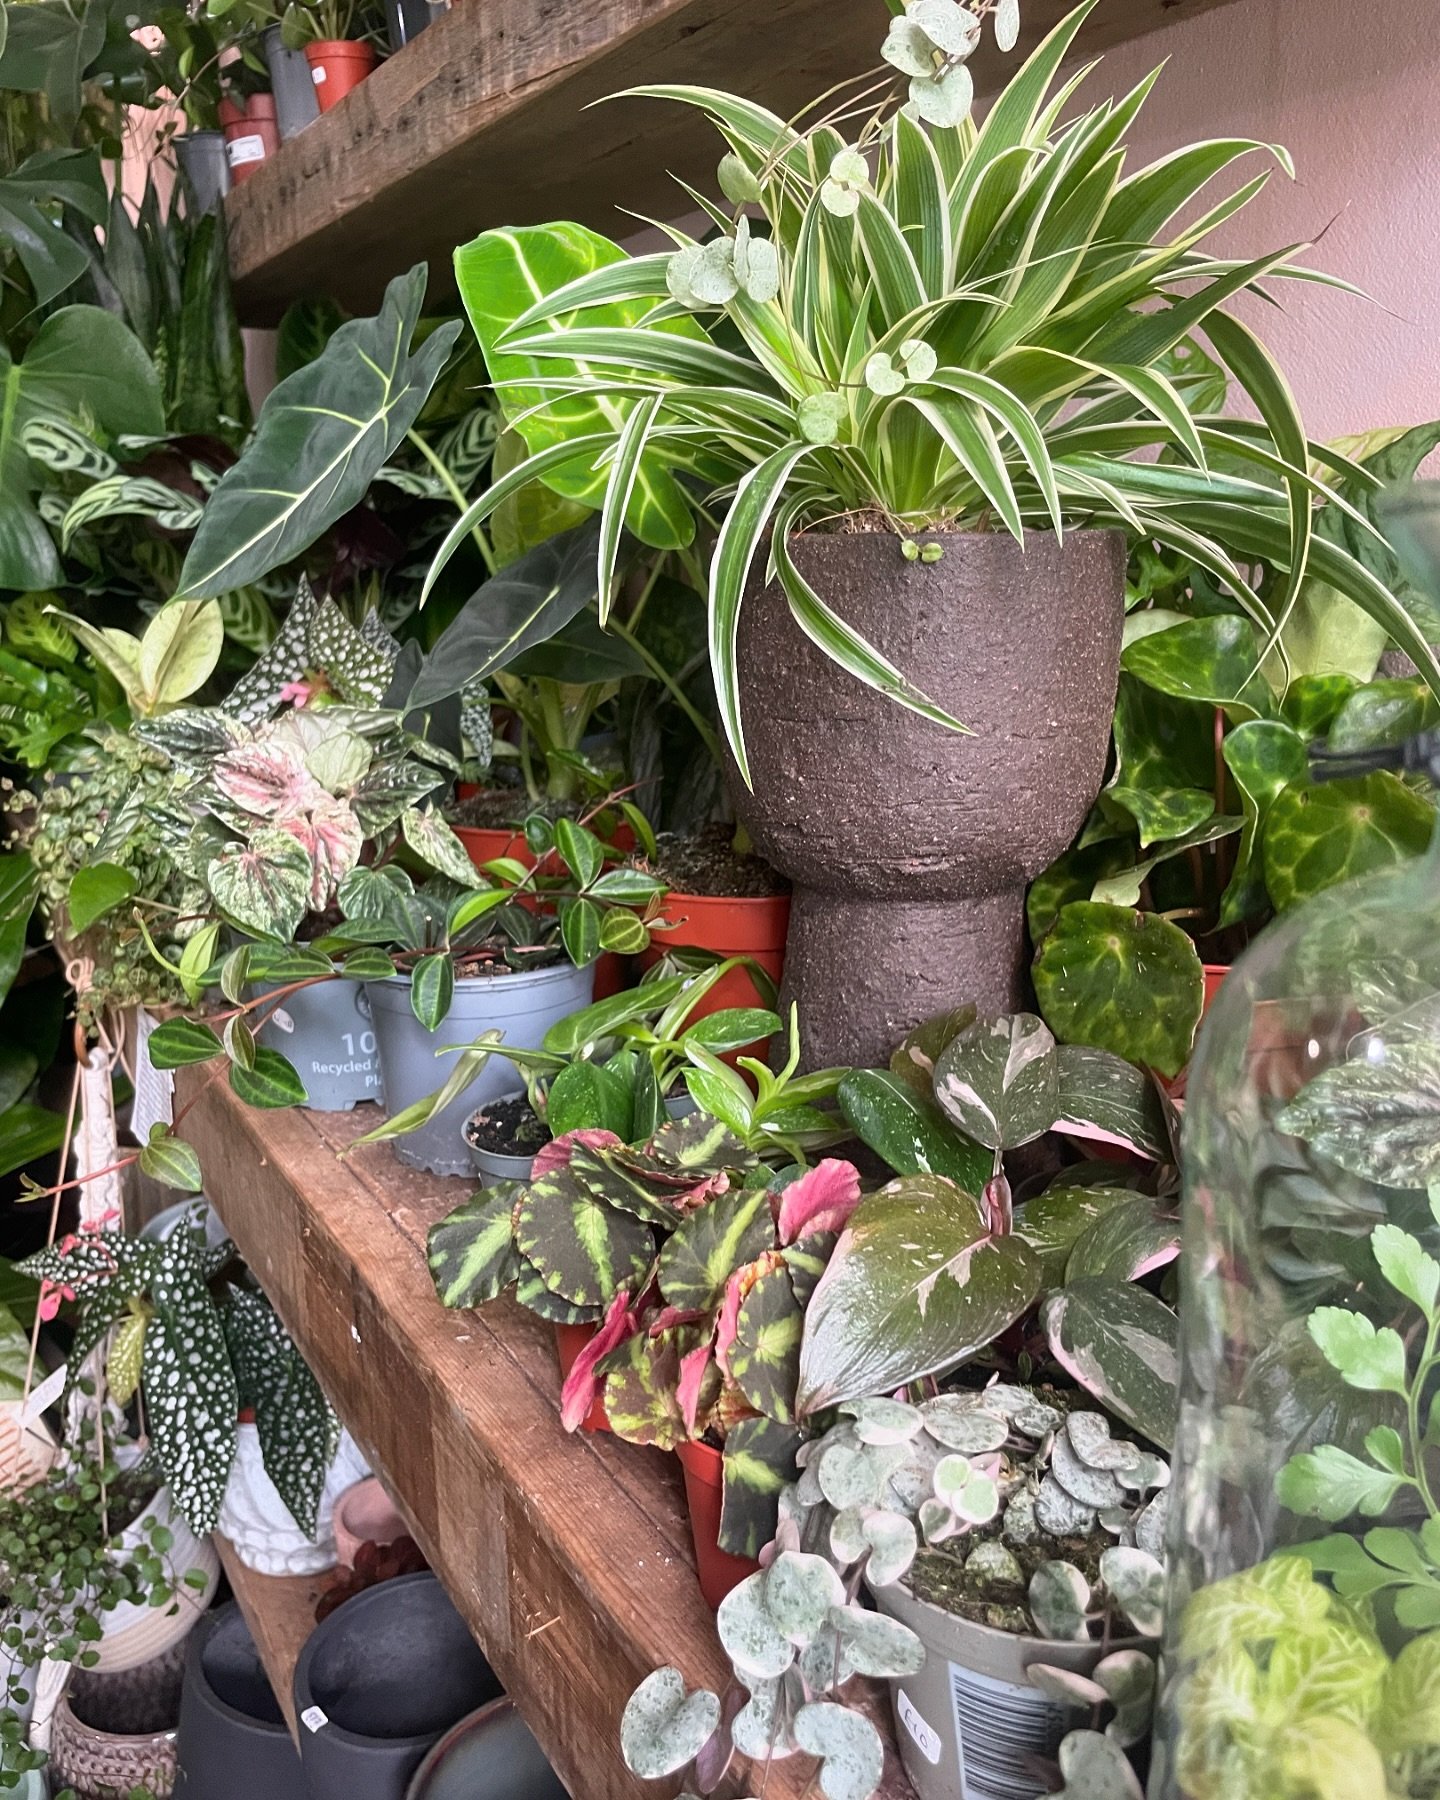 Shelves always look better when they&rsquo;re full of plants🌿

Ps - we will be closed Wednesday and Thursday next week while we&rsquo;re at our first ever &lsquo;Festival of Houseplants&rsquo; at the RHS Malvern Spring Festival! 

Don&rsquo;t worry 